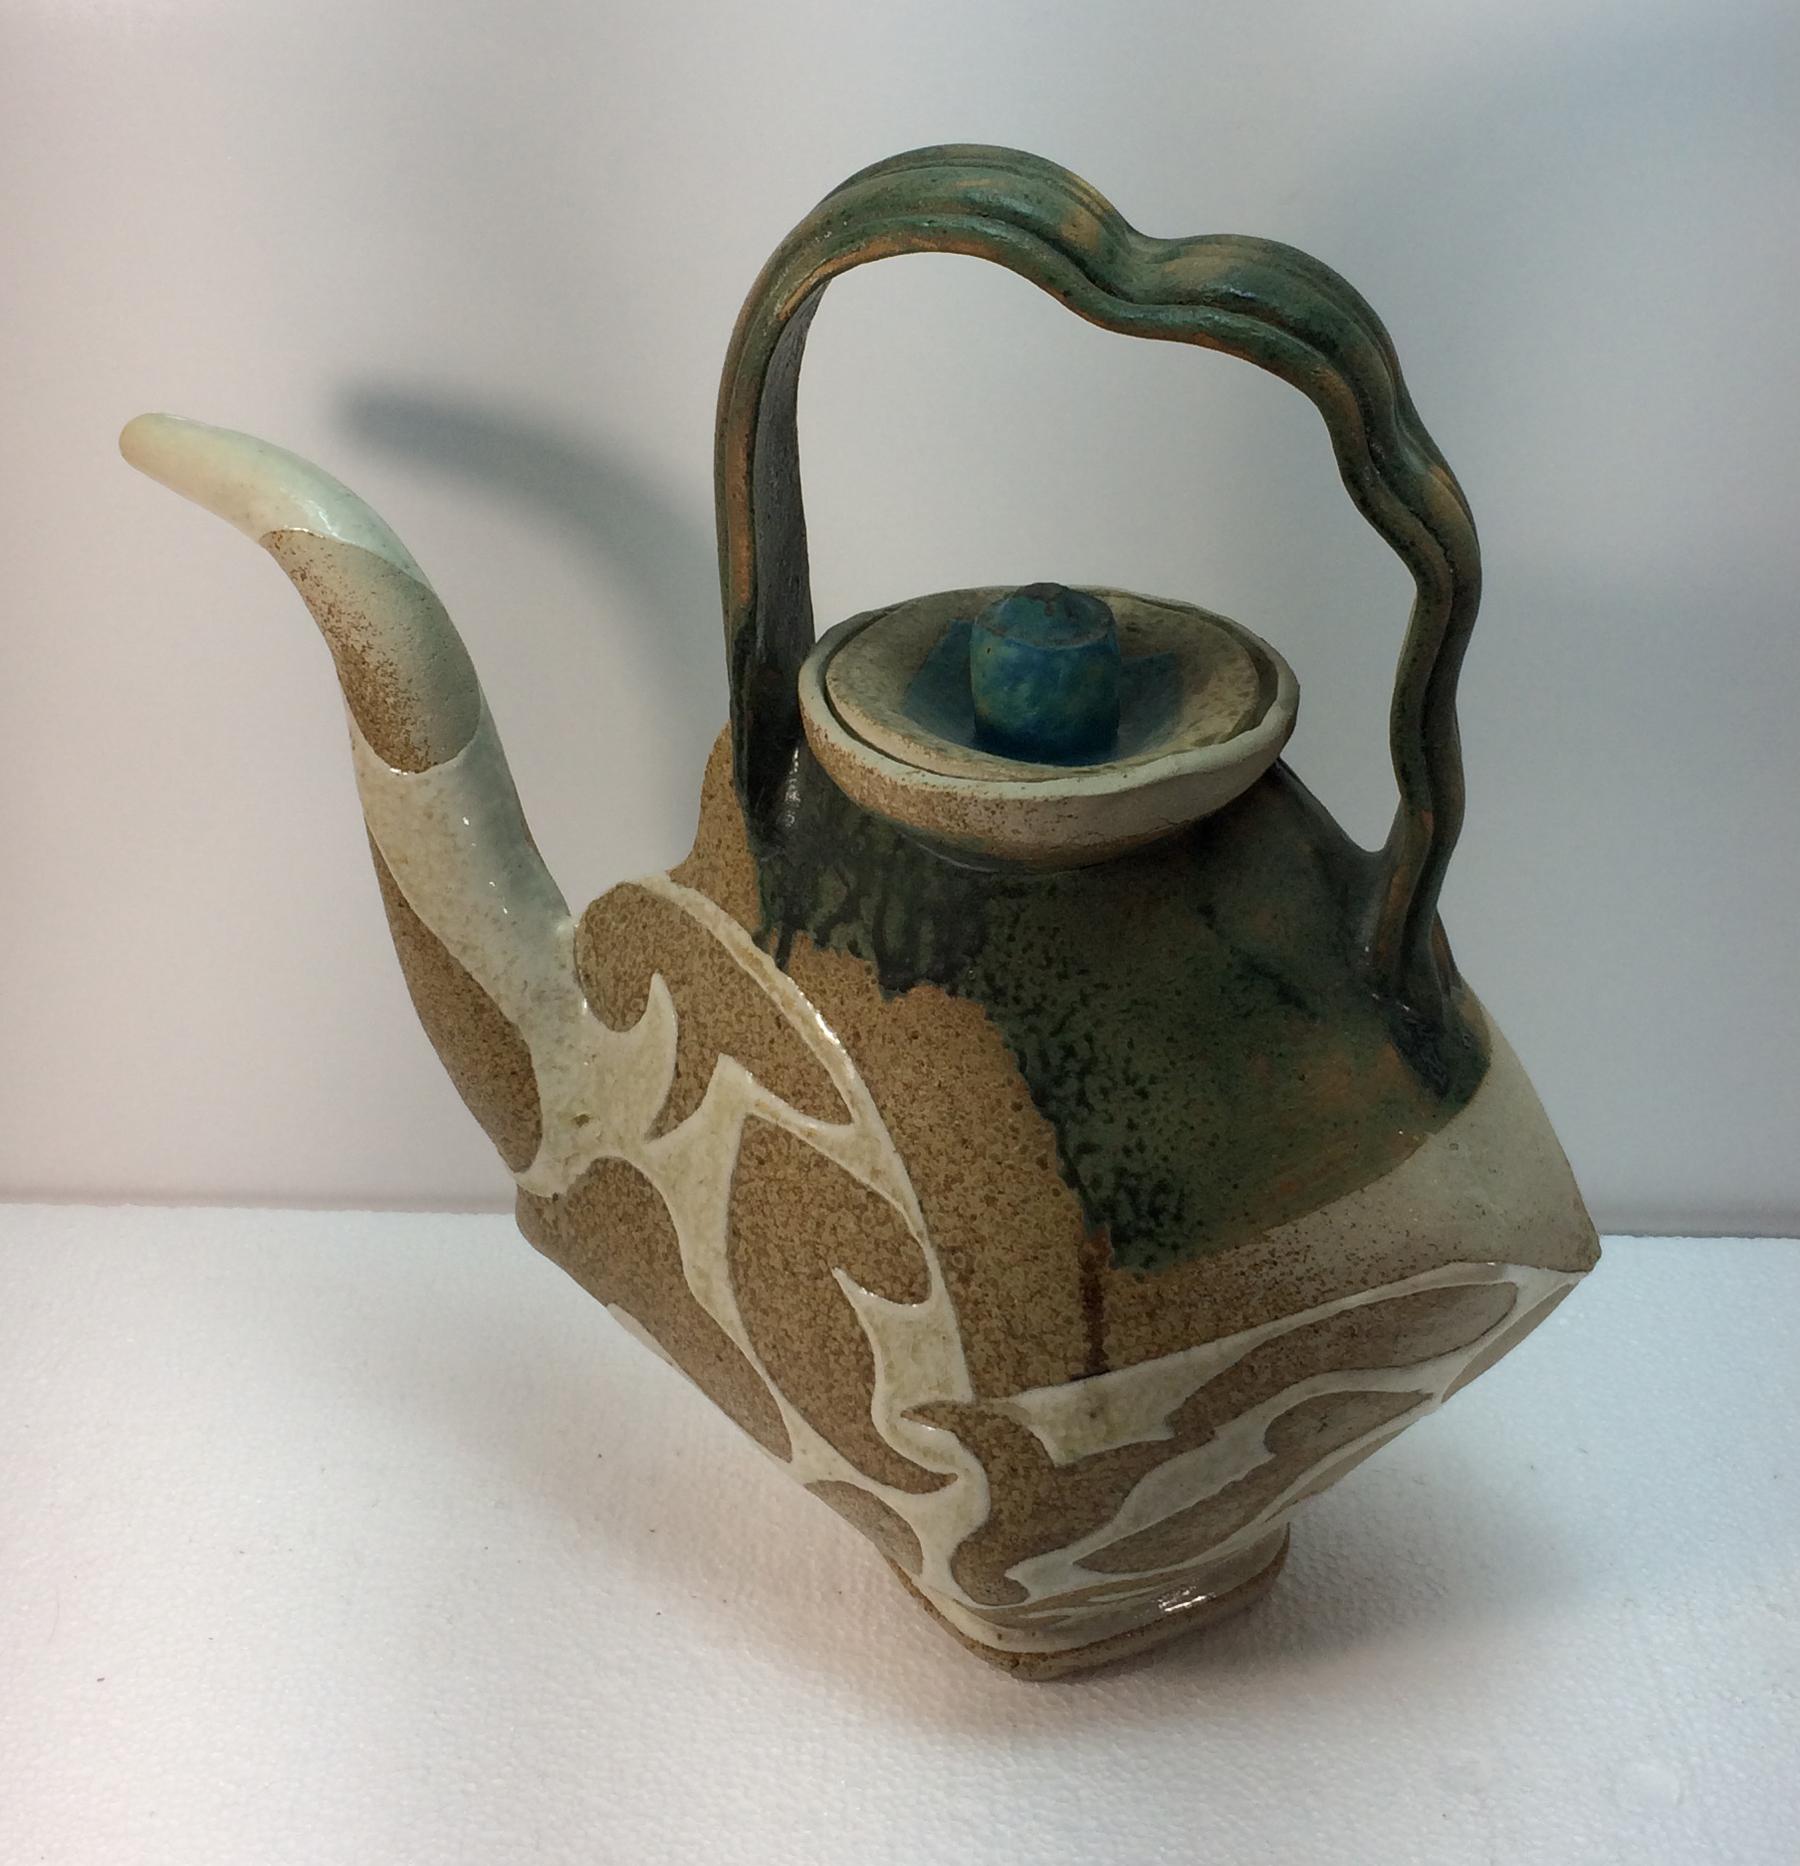 American John Gill Vintage Studio Art Pottery Teapot Abstract Ceramic Signed Dated 84 For Sale